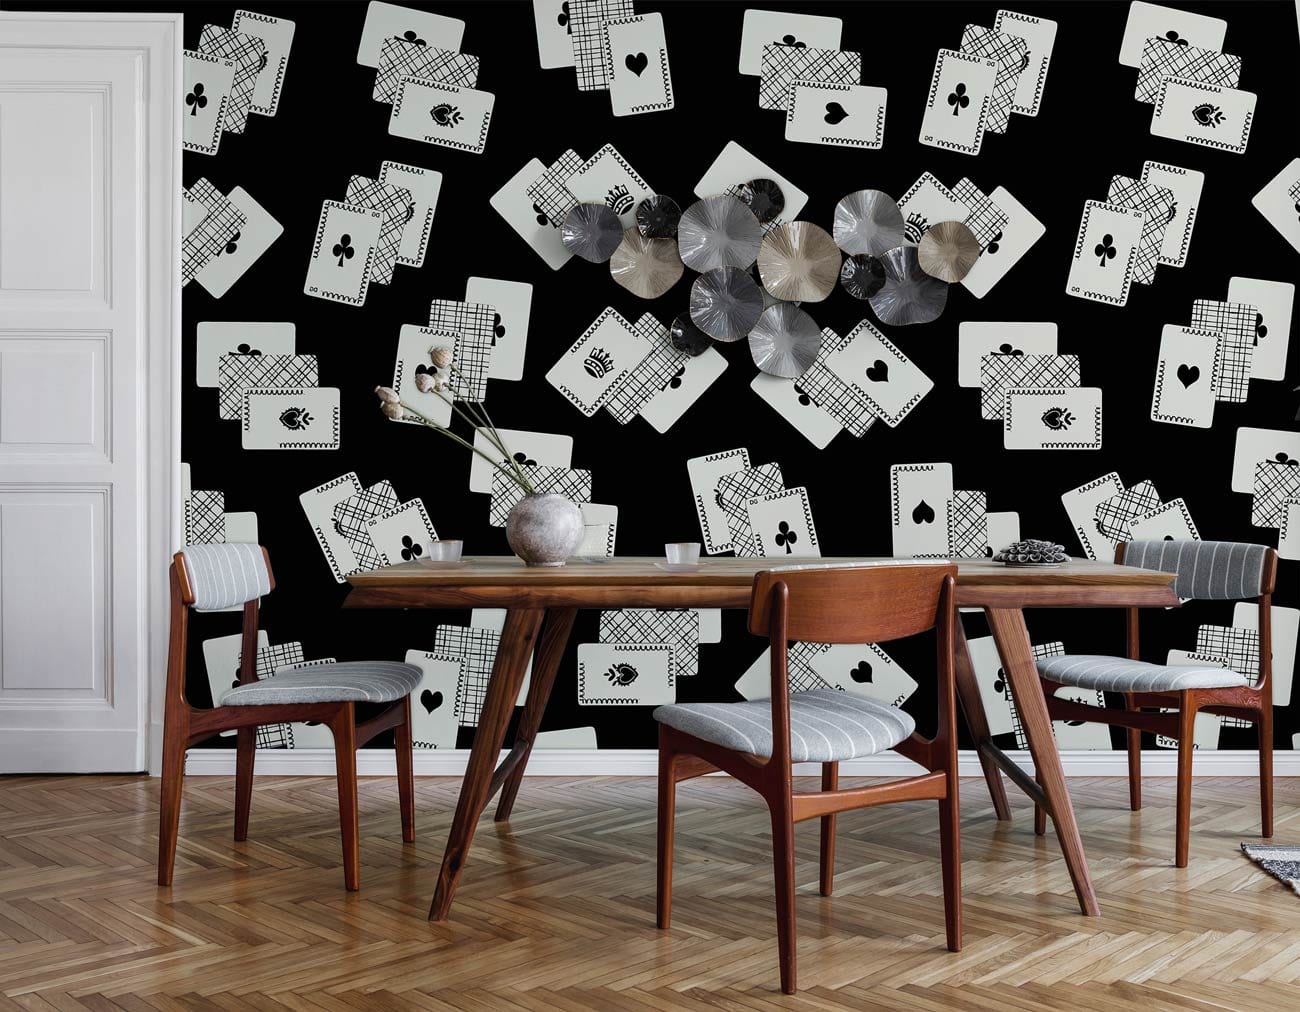 humorous and interesting wall mural painting with retro poker effect